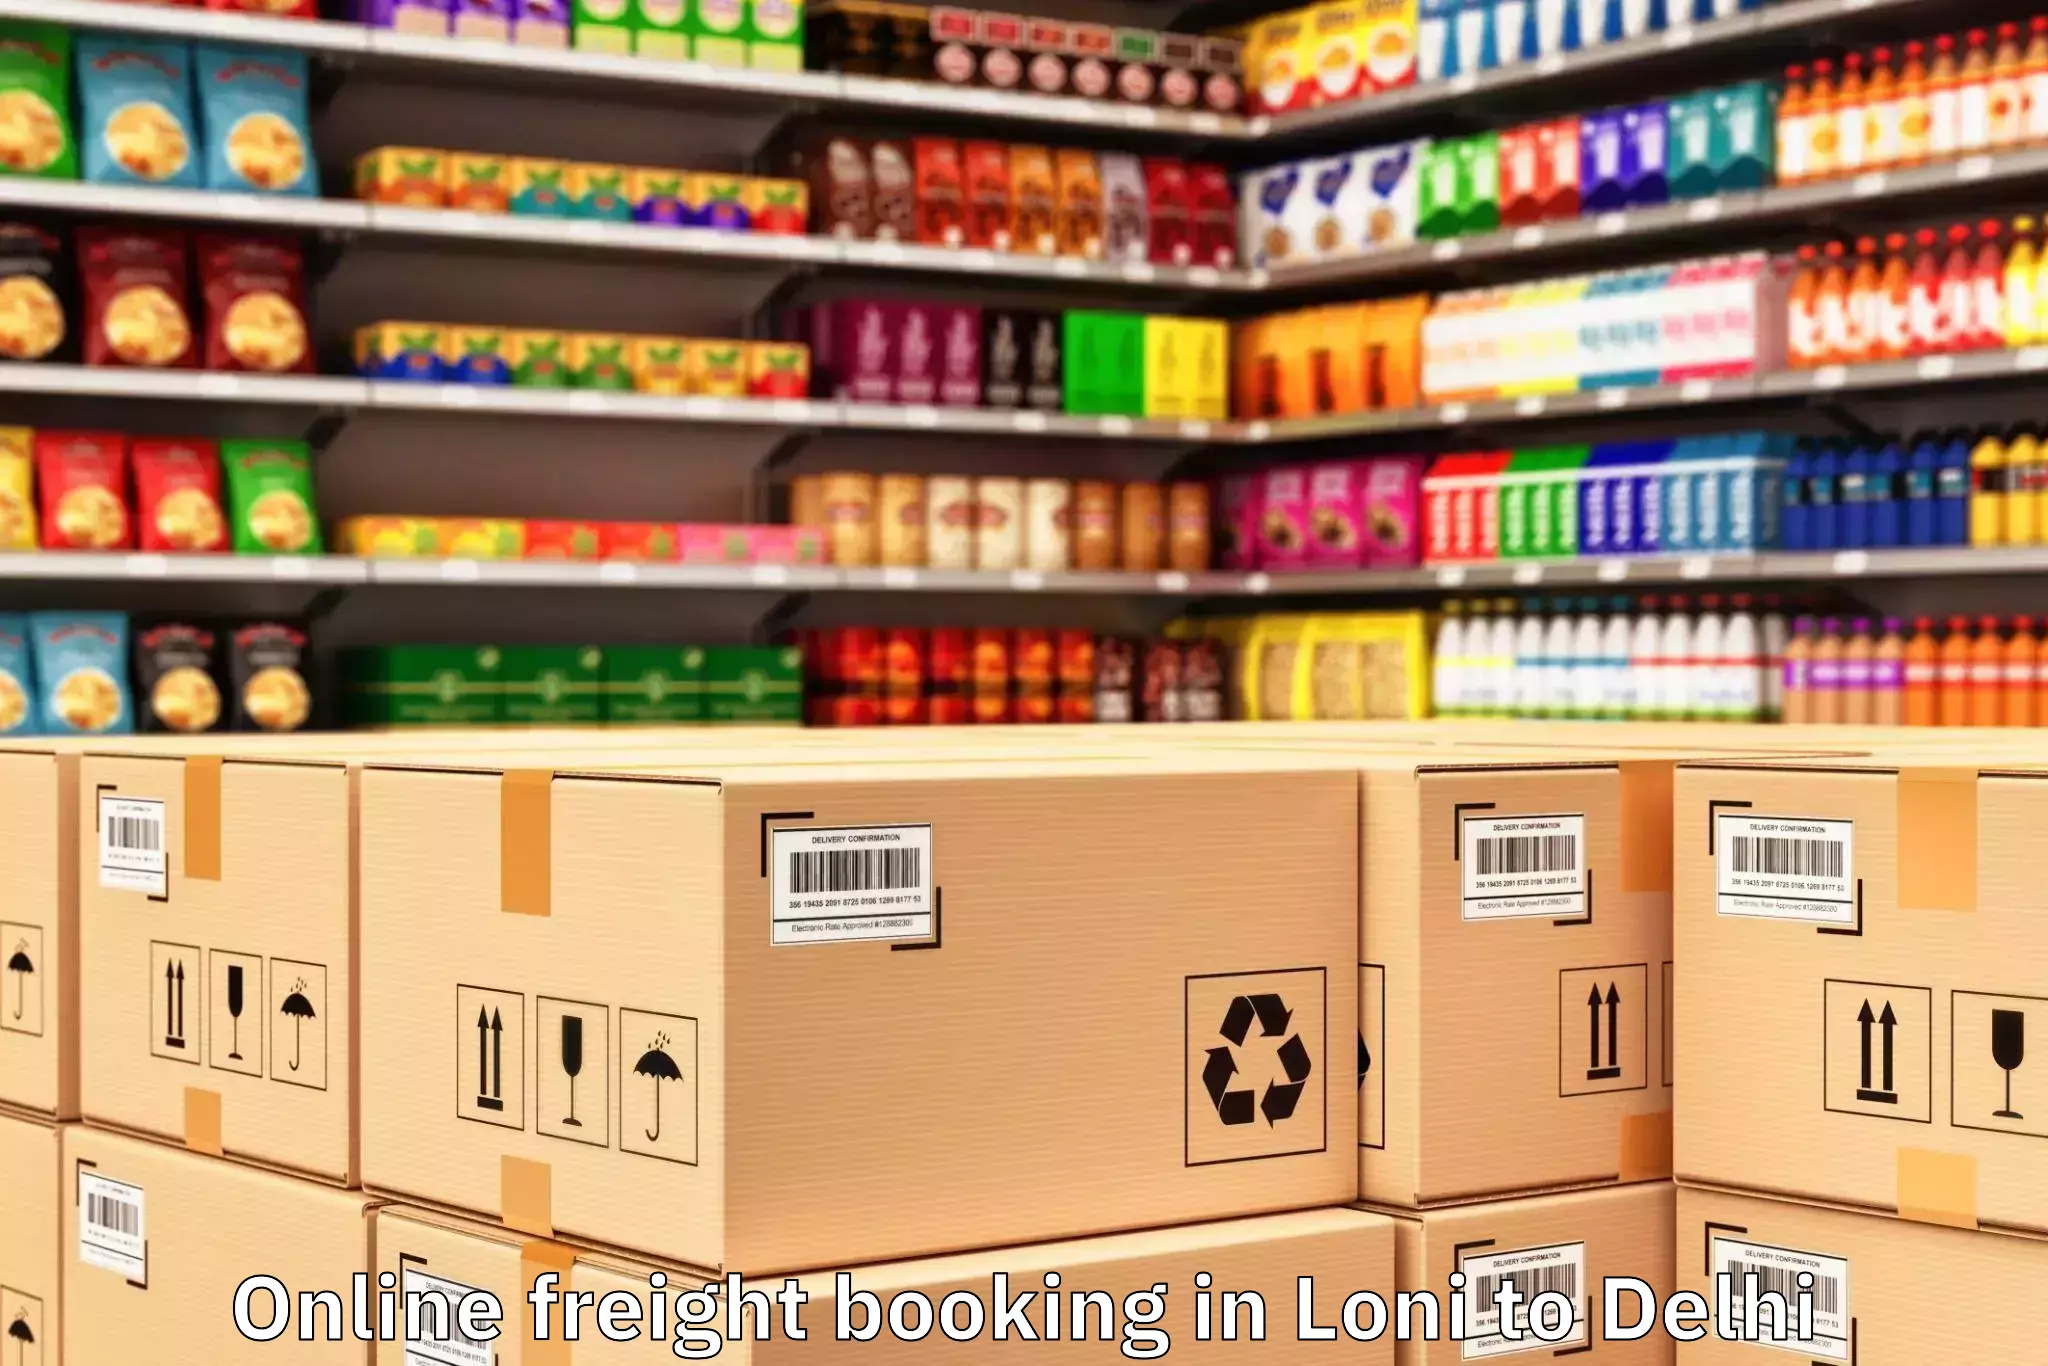 Book Loni to Delhi Online Freight Booking Online